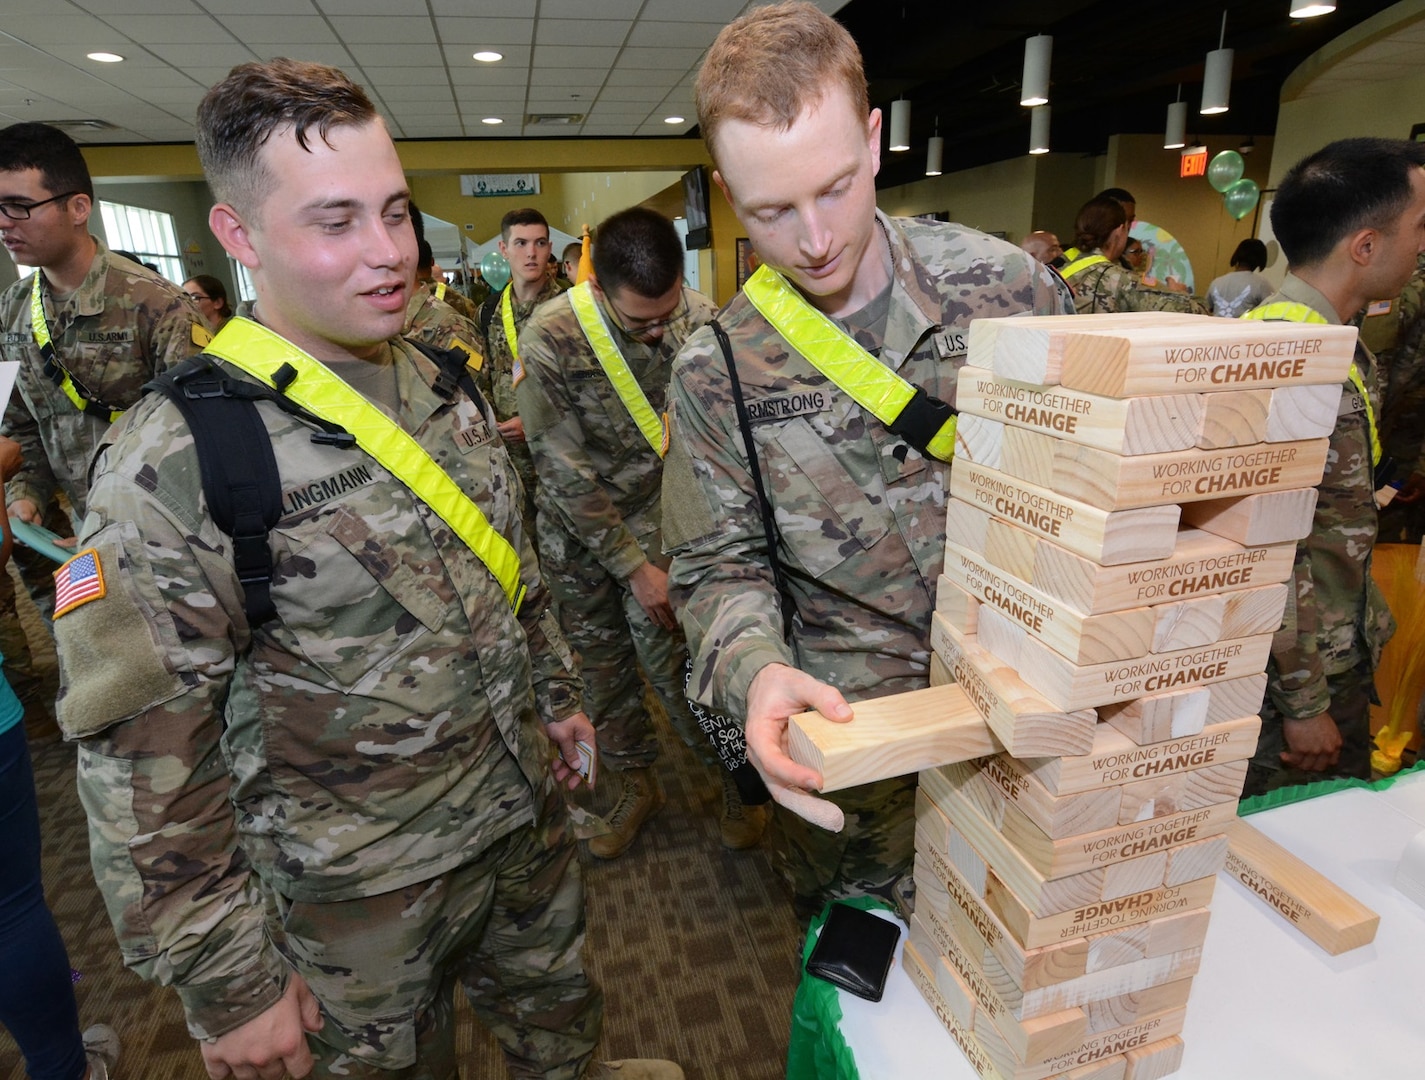 A Soldier slowly pulls out a wooden block from a tower labeled with “Together Working For Change.”